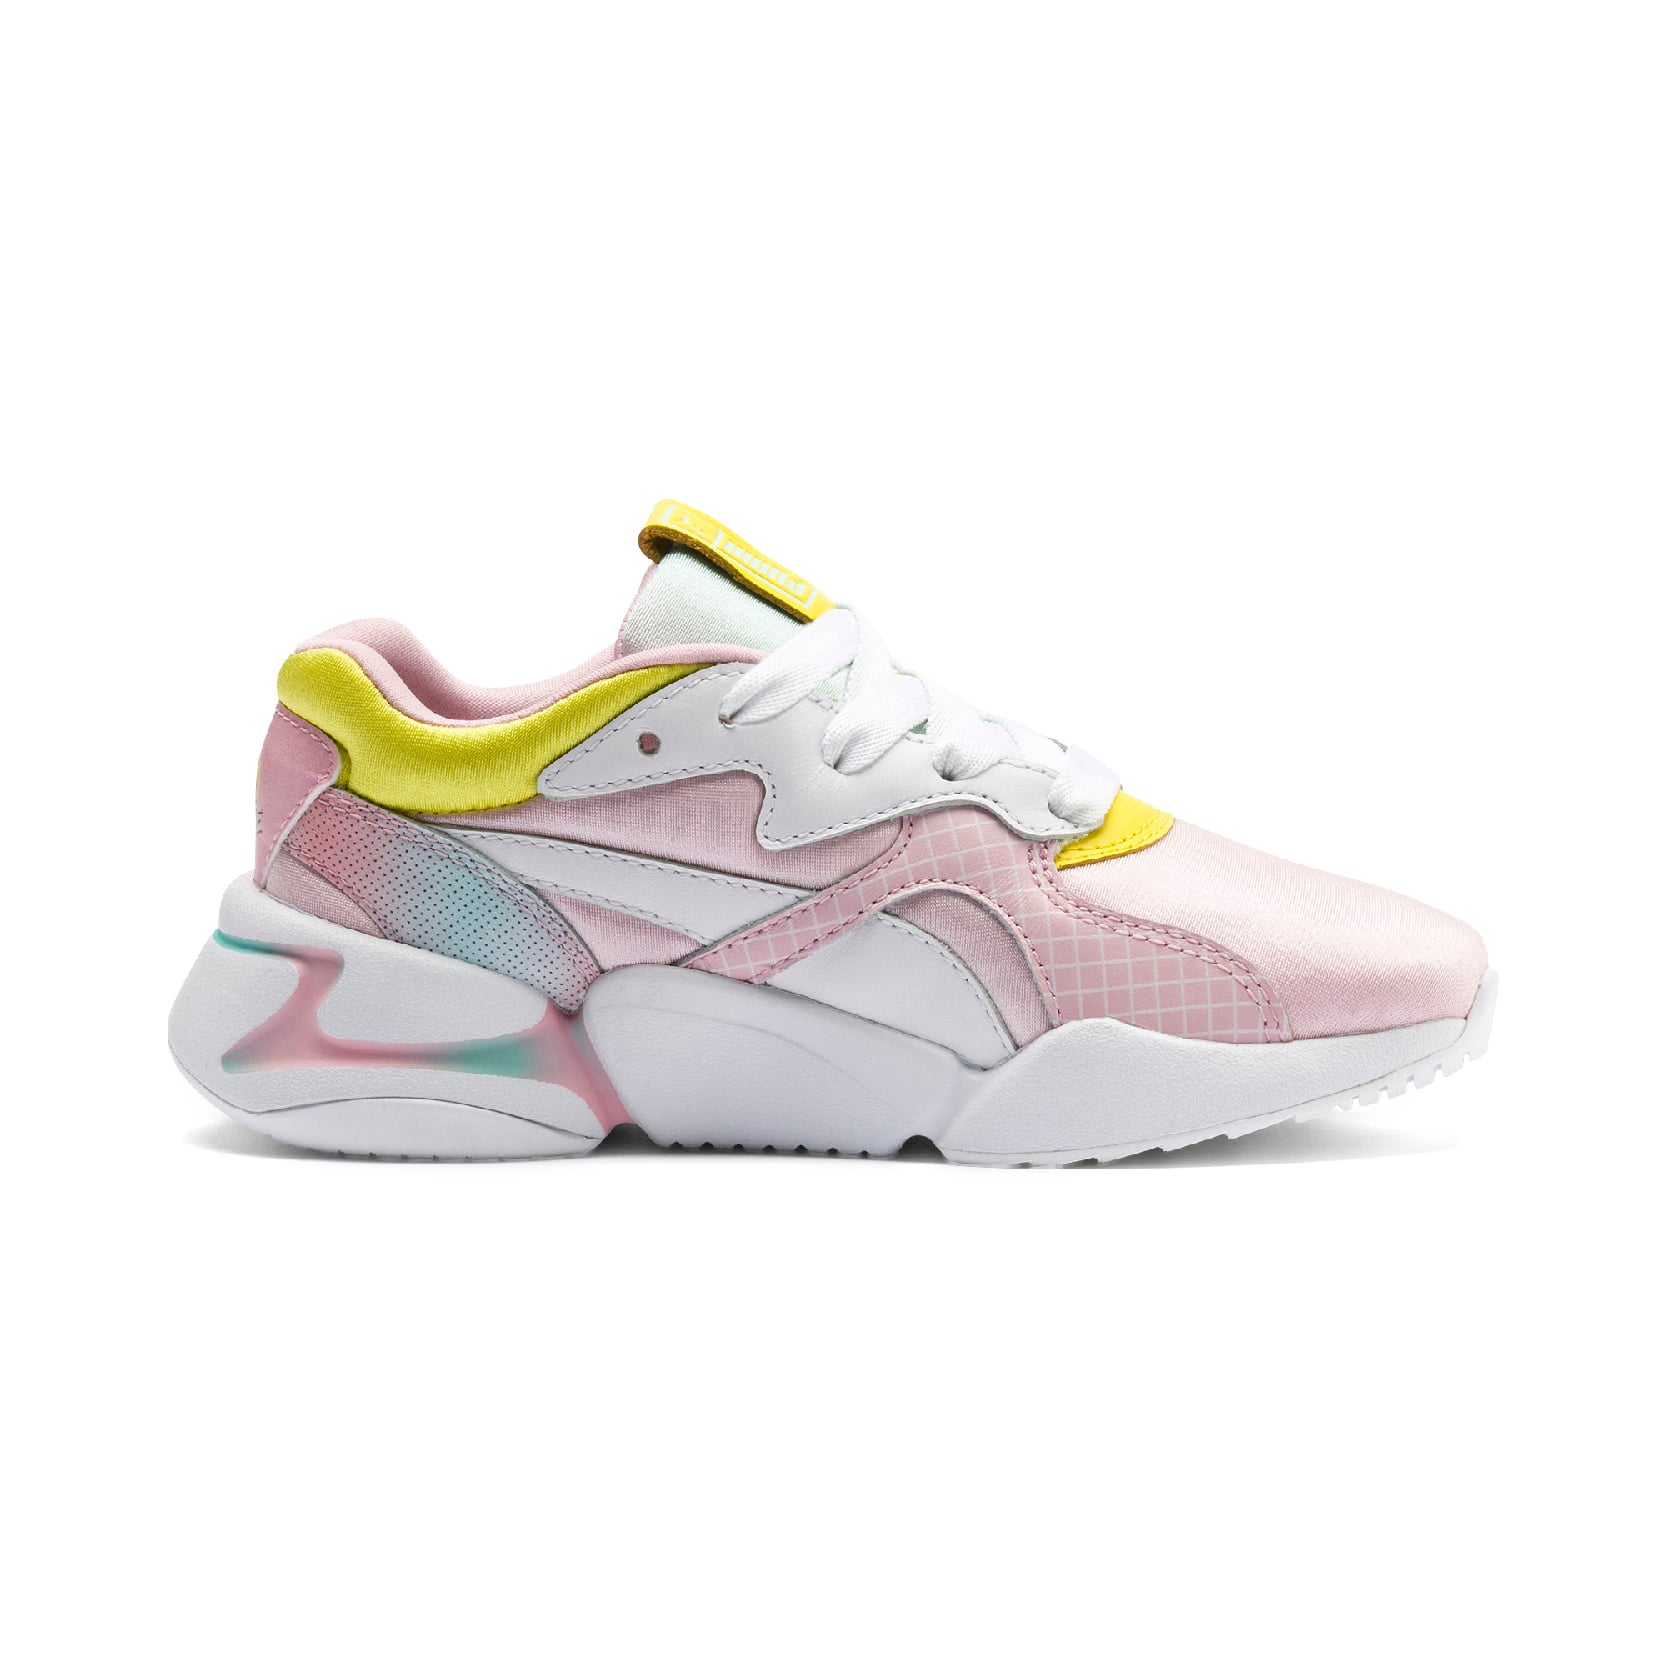 Barbie Puma Sneakers and Collection 